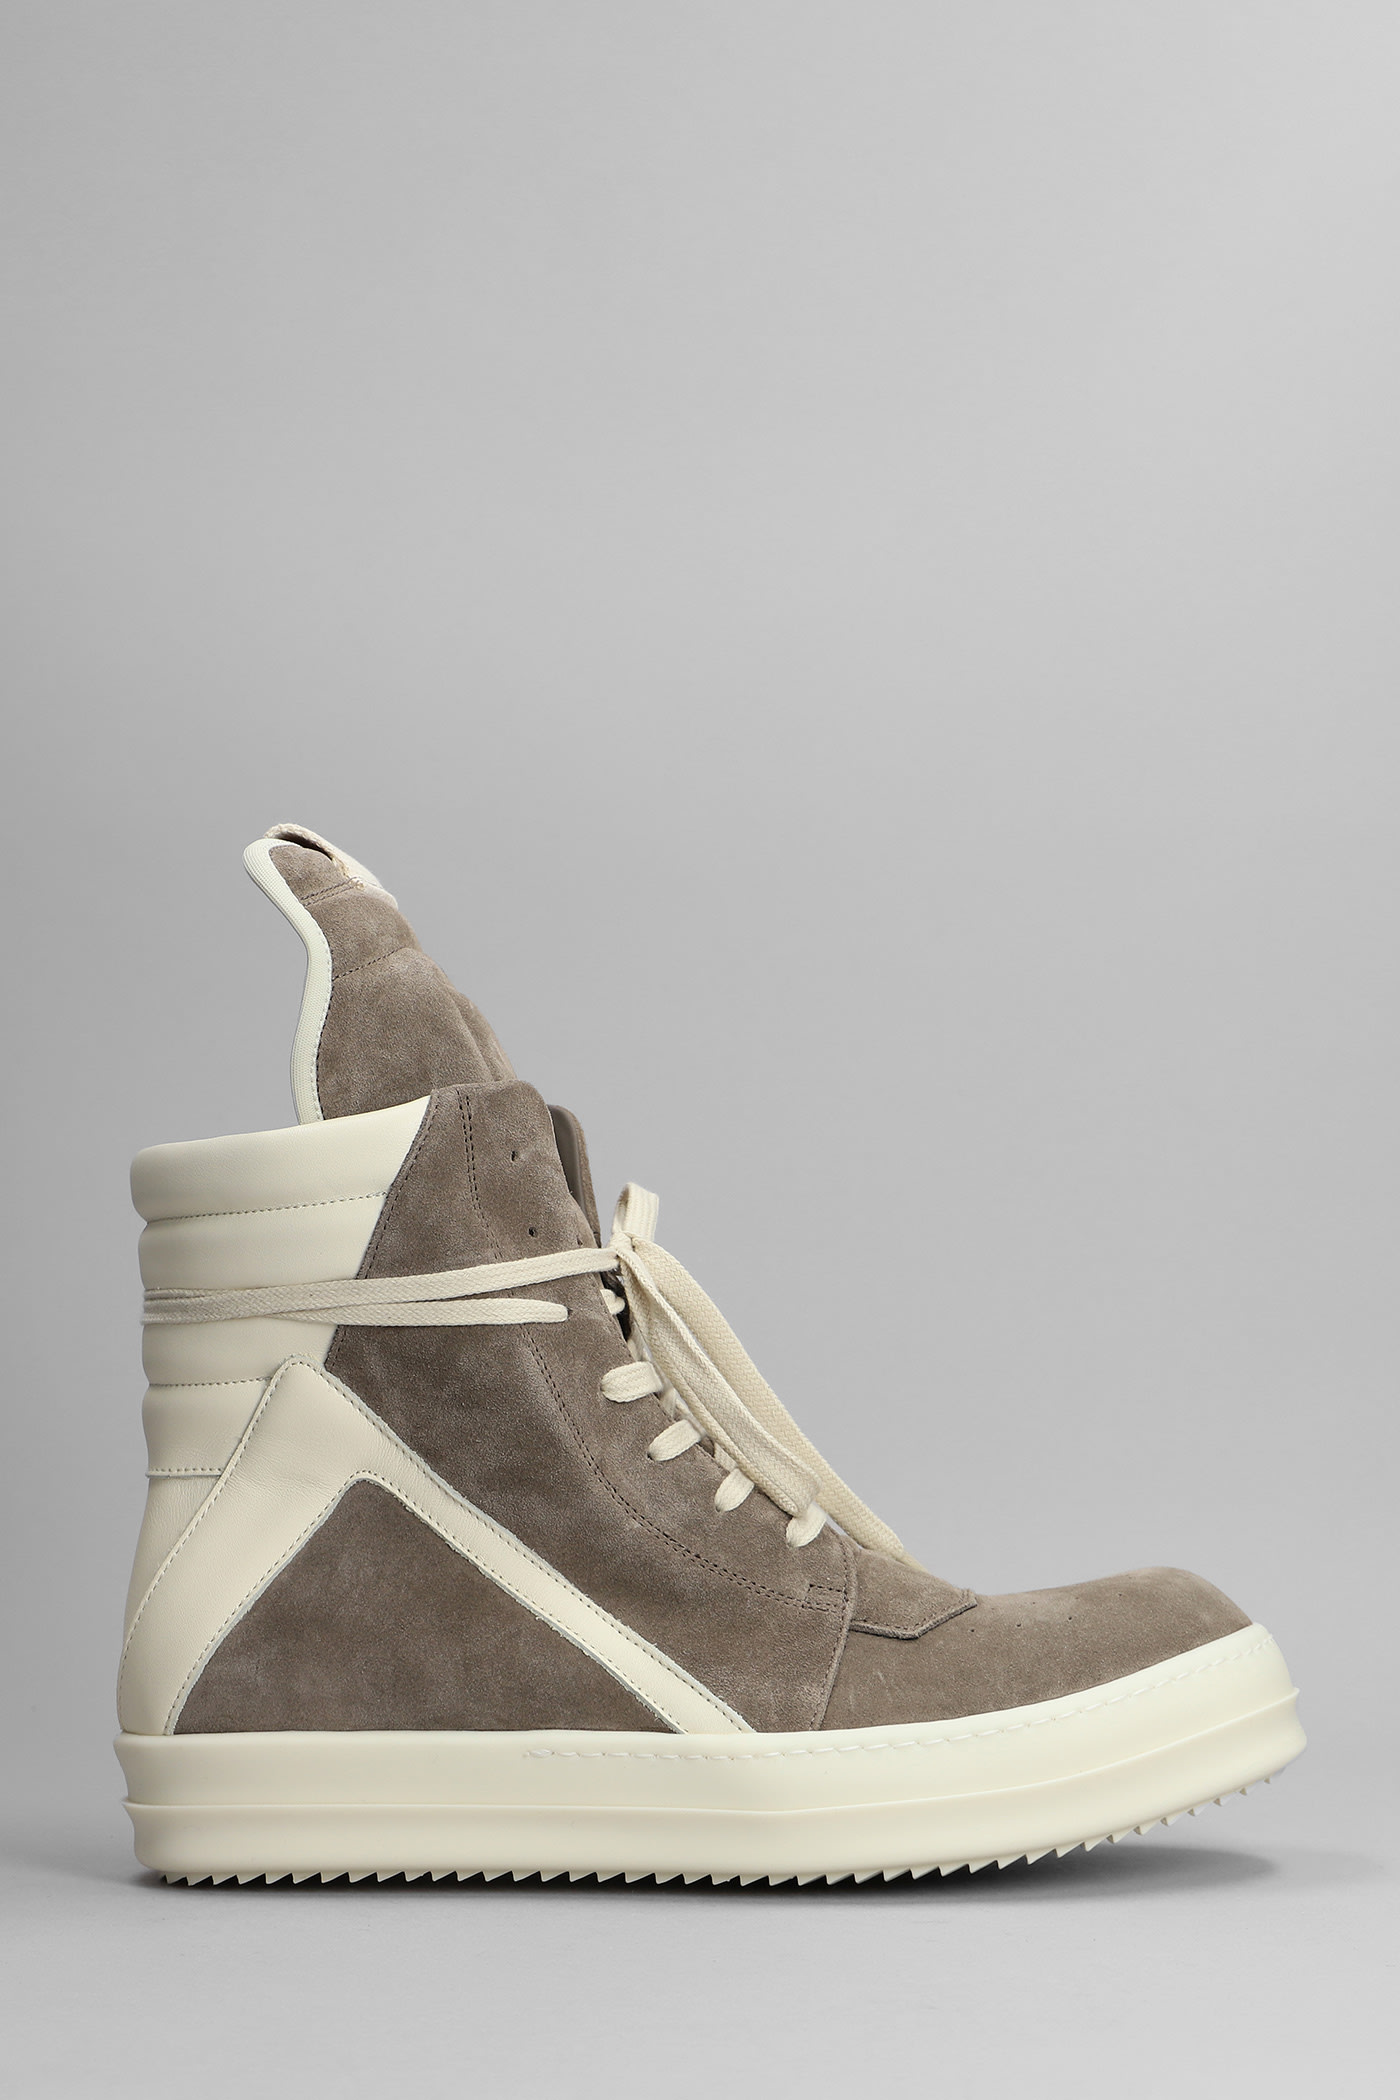 RICK OWENS GEOBASKET SNEAKERS IN TAUPE LEATHER